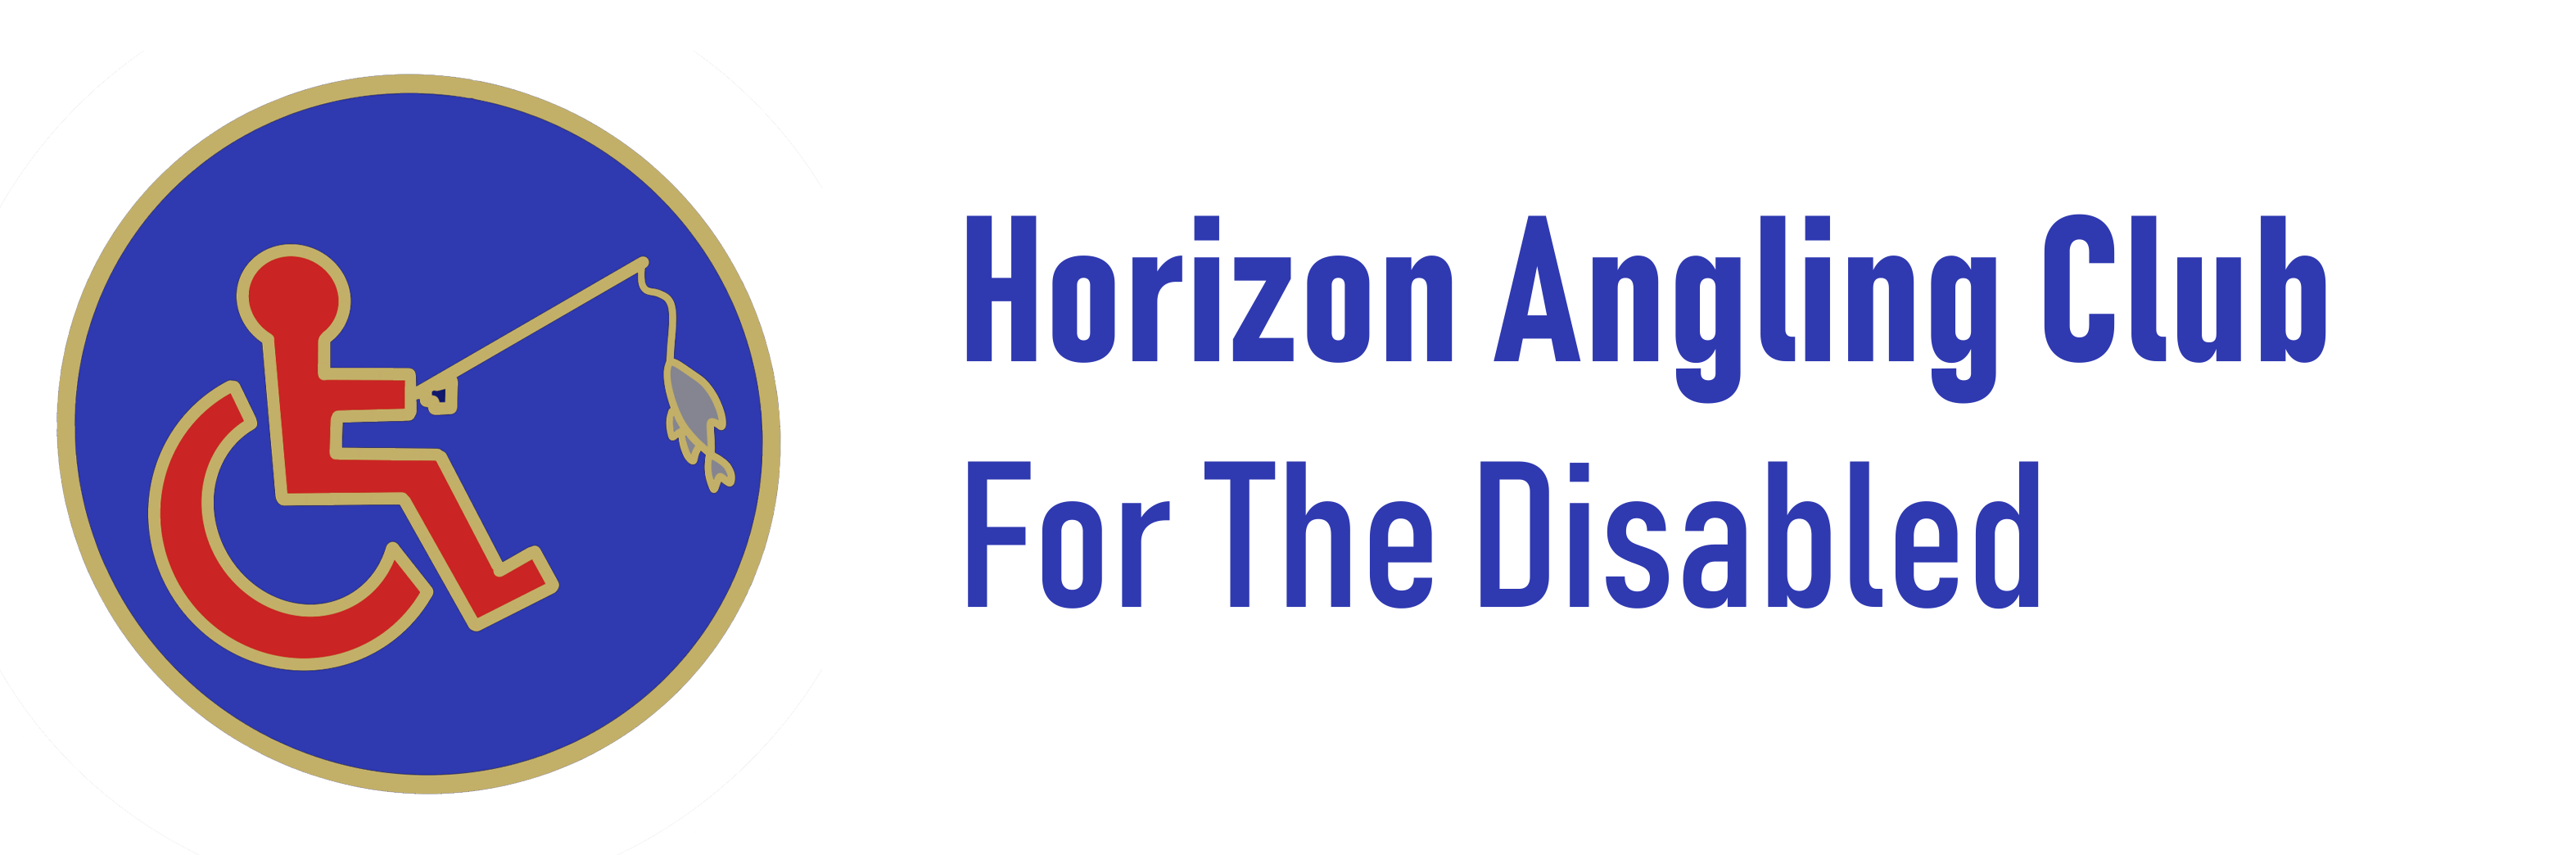 Horizon Angling Club for the Disabled